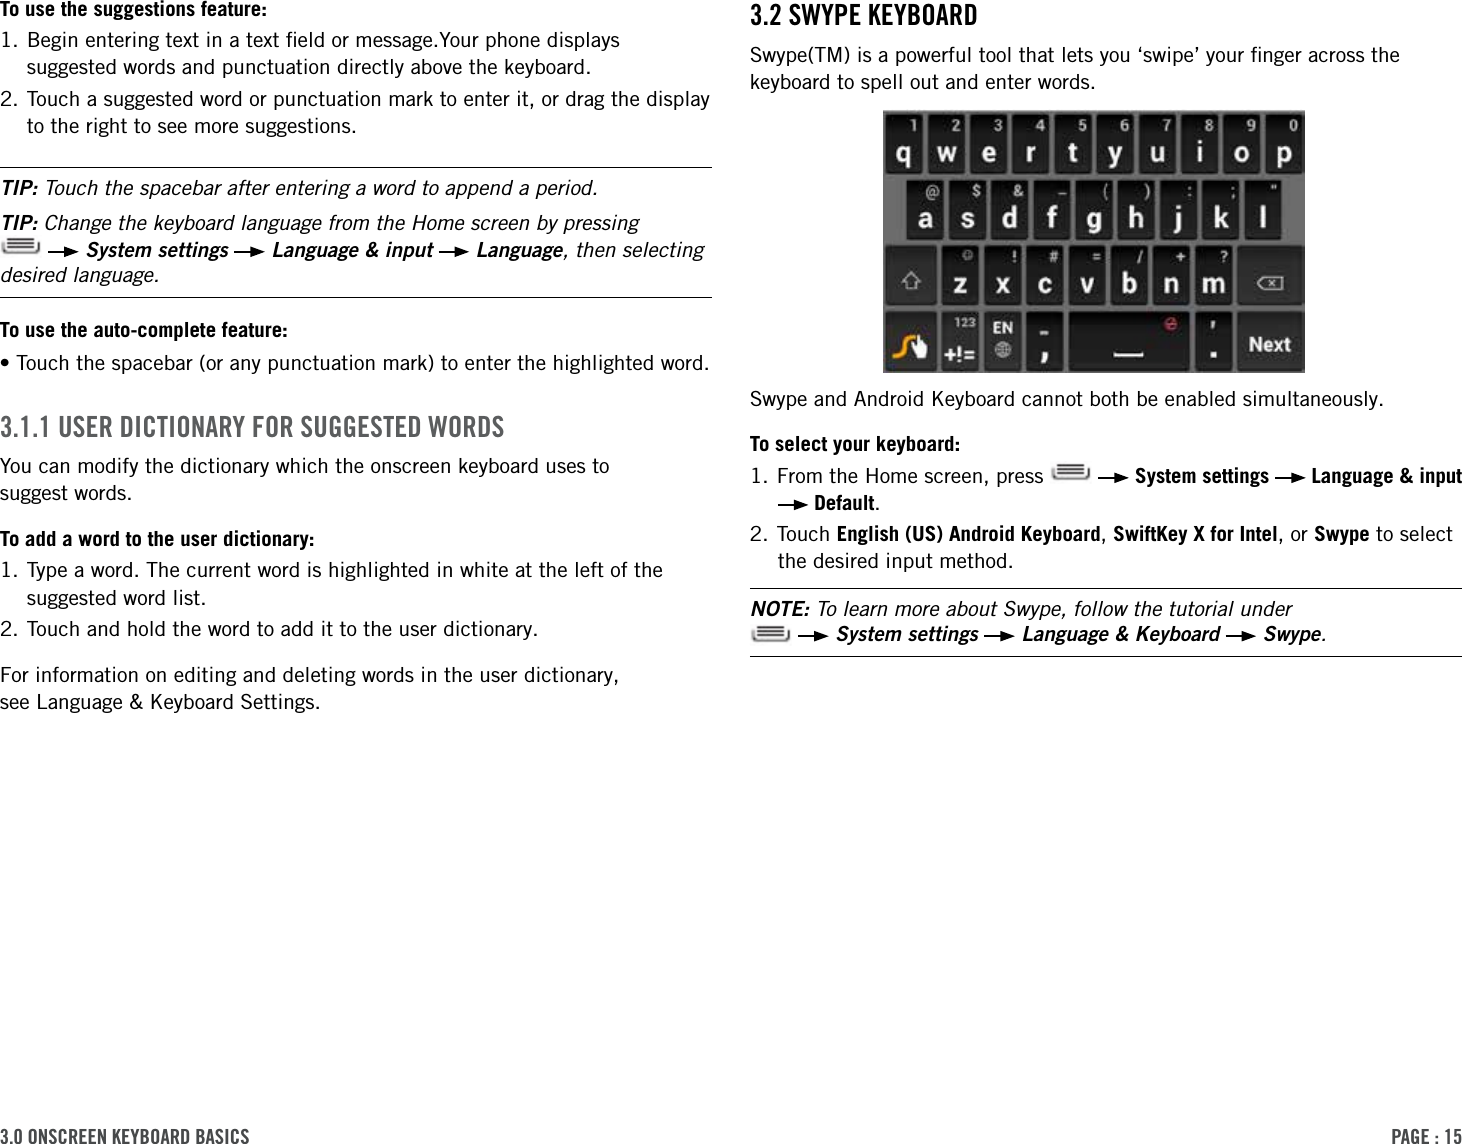 PAge : 153.0 onscreen keYBoArd BAsics3.2 sWYPe keYBoArdSwype(TM) is a powerful tool that lets you ‘swipe’ your ﬁnger across the keyboard to spell out and enter words. Swype and Android Keyboard cannot both be enabled simultaneously.To select your keyboard:1. From the Home screen, press     System settings   Language &amp; input  Default.2. Touch English (US) Android Keyboard, SwiftKey X for Intel, or Swype to select the desired input method.NOTE: To learn more about Swype, follow the tutorial under     System settings   Language &amp; Keyboard   Swype.To use the suggestions feature:1.  Begin entering text in a text ﬁeld or message.Your phone displays suggested words and punctuation directly above the keyboard.2.  Touch a suggested word or punctuation mark to enter it, or drag the display to the right to see more suggestions.TIP: Touch the spacebar after entering a word to append a period.TIP: Change the keyboard language from the Home screen by pressing    System settings   Language &amp; input   Language, then selecting desired language.To use the auto-complete feature:• Touch the spacebar (or any punctuation mark) to enter the highlighted word.3.1.1 user dictionArY For suggested WordsYou can modify the dictionary which the onscreen keyboard uses to  suggest words.To add a word to the user dictionary:1.  Type a word. The current word is highlighted in white at the left of the suggested word list.2. Touch and hold the word to add it to the user dictionary.For information on editing and deleting words in the user dictionary,  see Language &amp; Keyboard Settings.